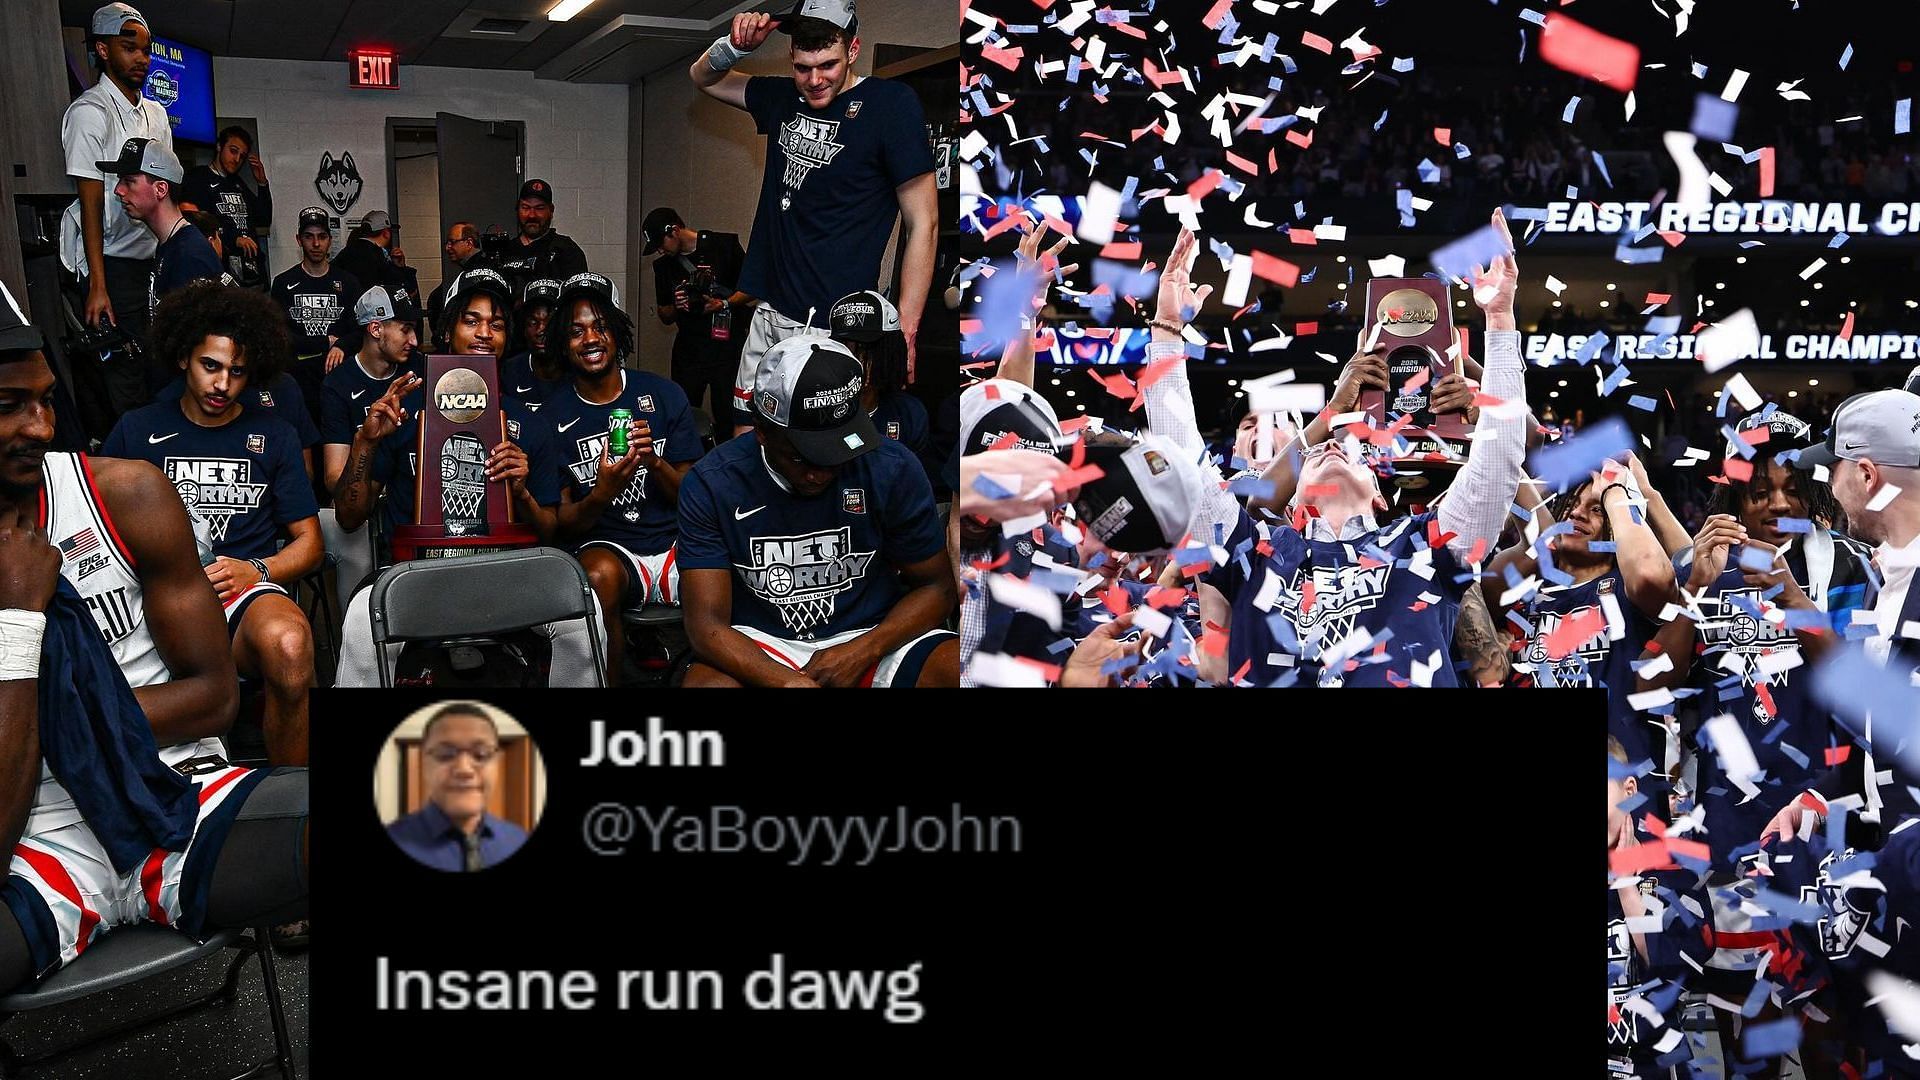 Fans react to UConn